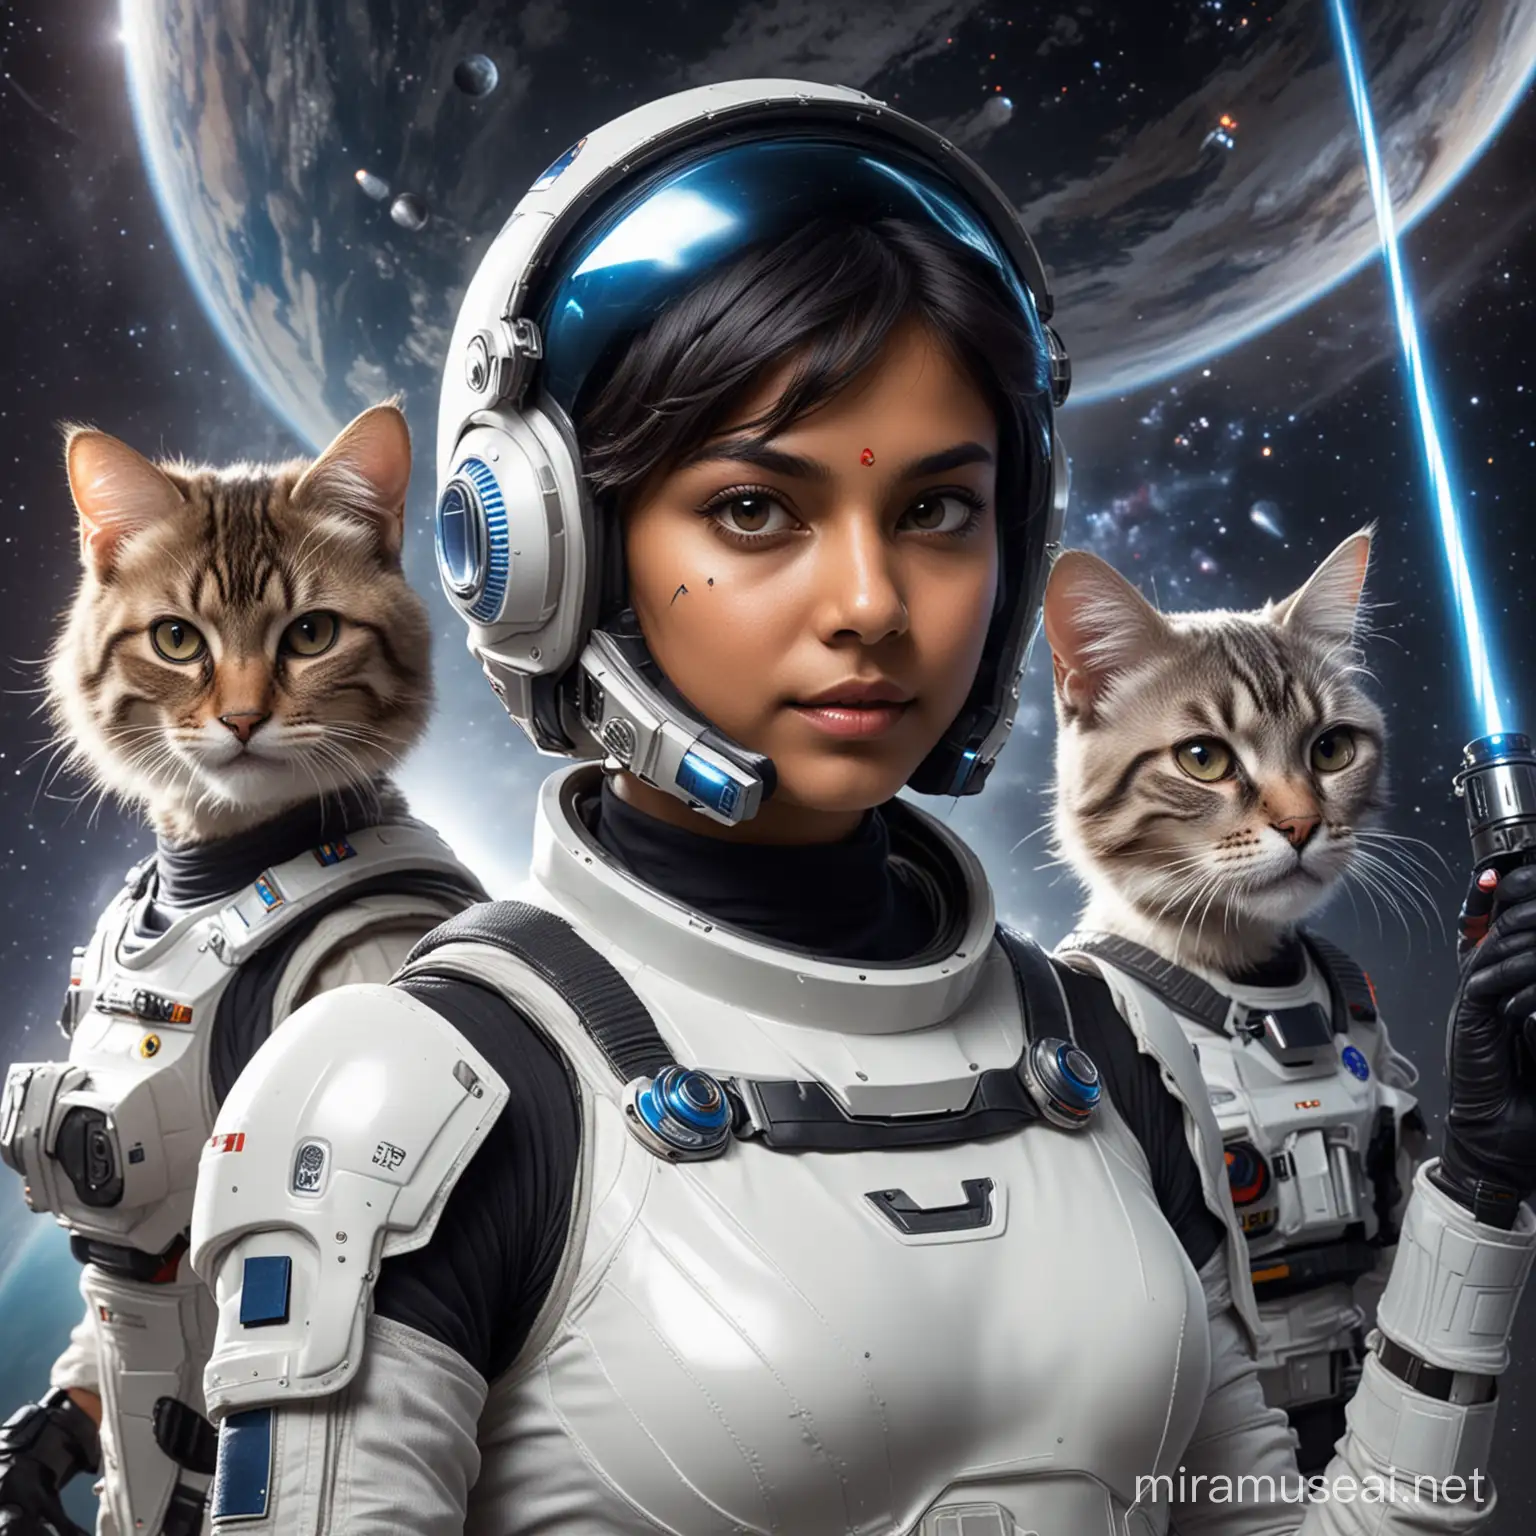 Indian Girl with Short Hair Wielding Lightsaber in Space Suit with Cats on Neptune